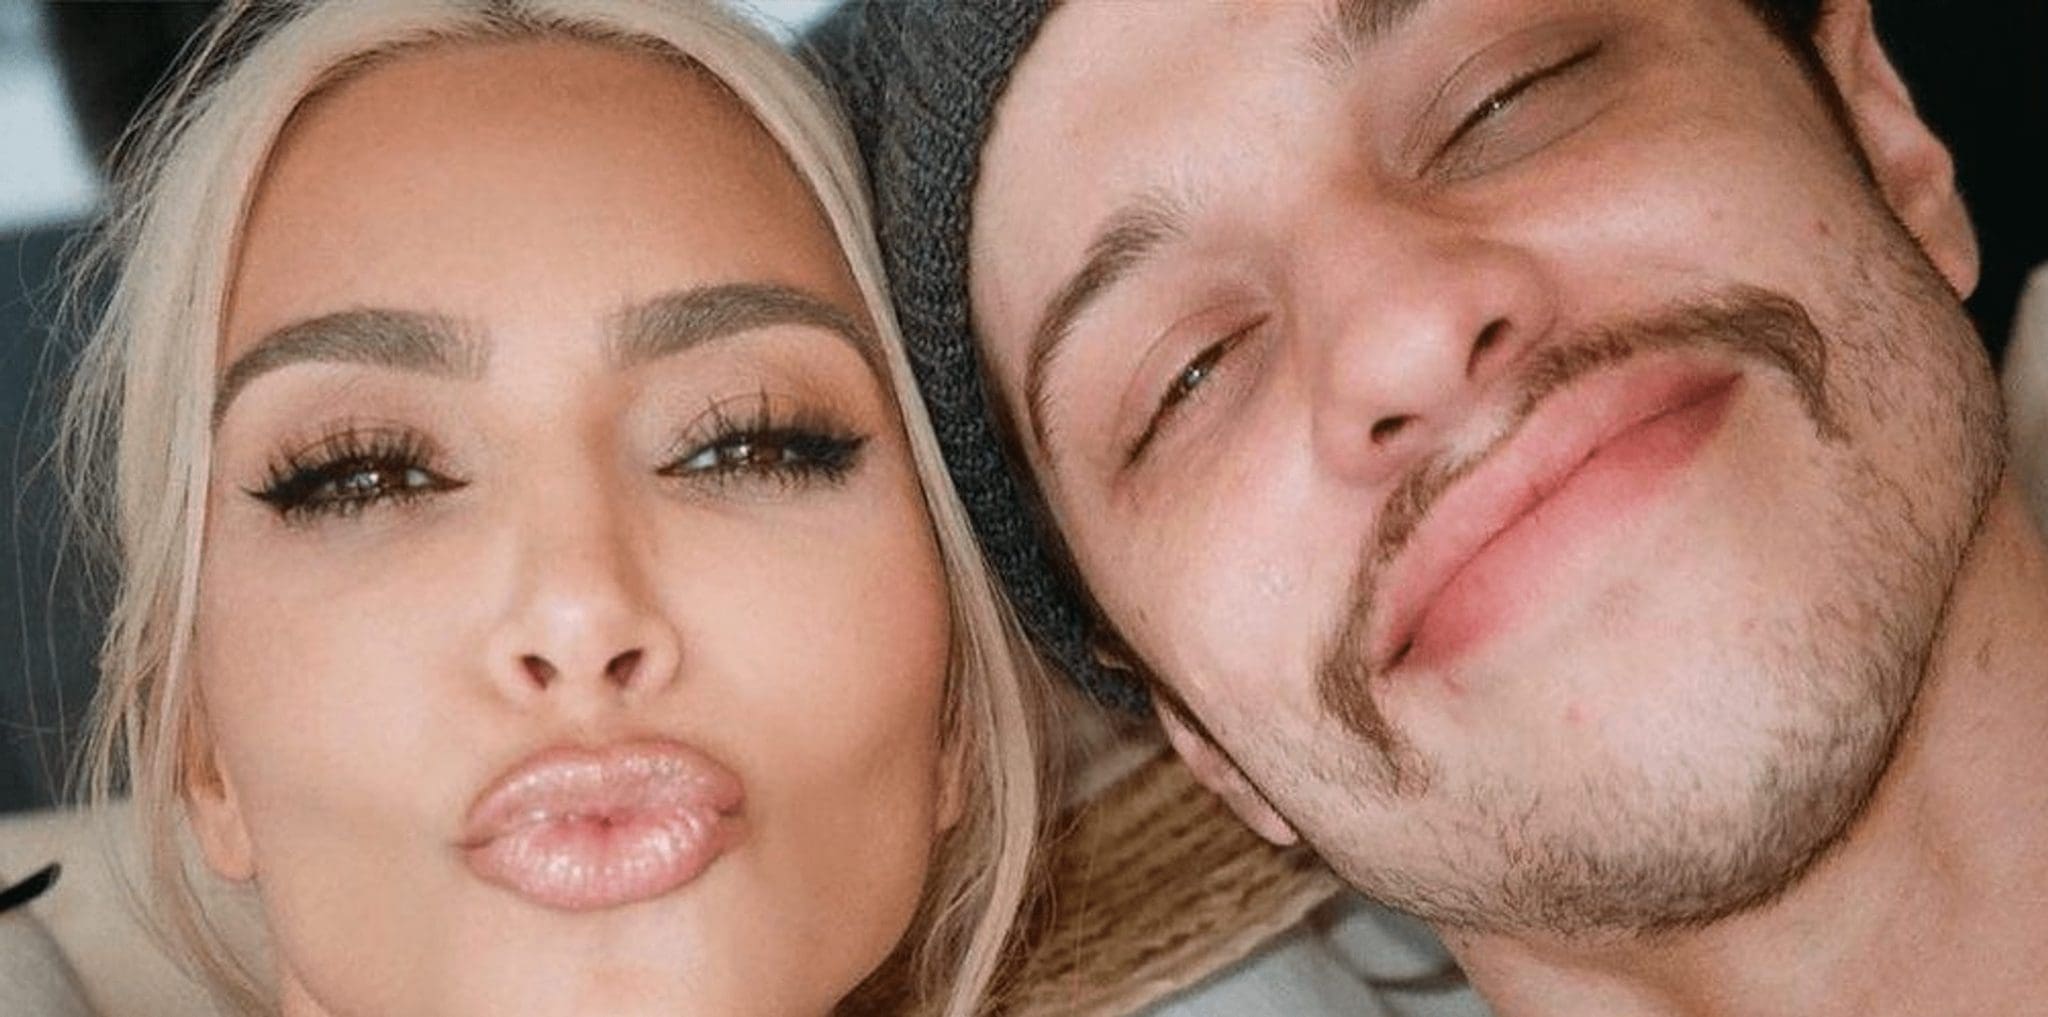 41-year-old Kim Kardashian Showed Tender Shots With Her Lover. TV Star And 28-Year-Old Pete Davidson Rested Together